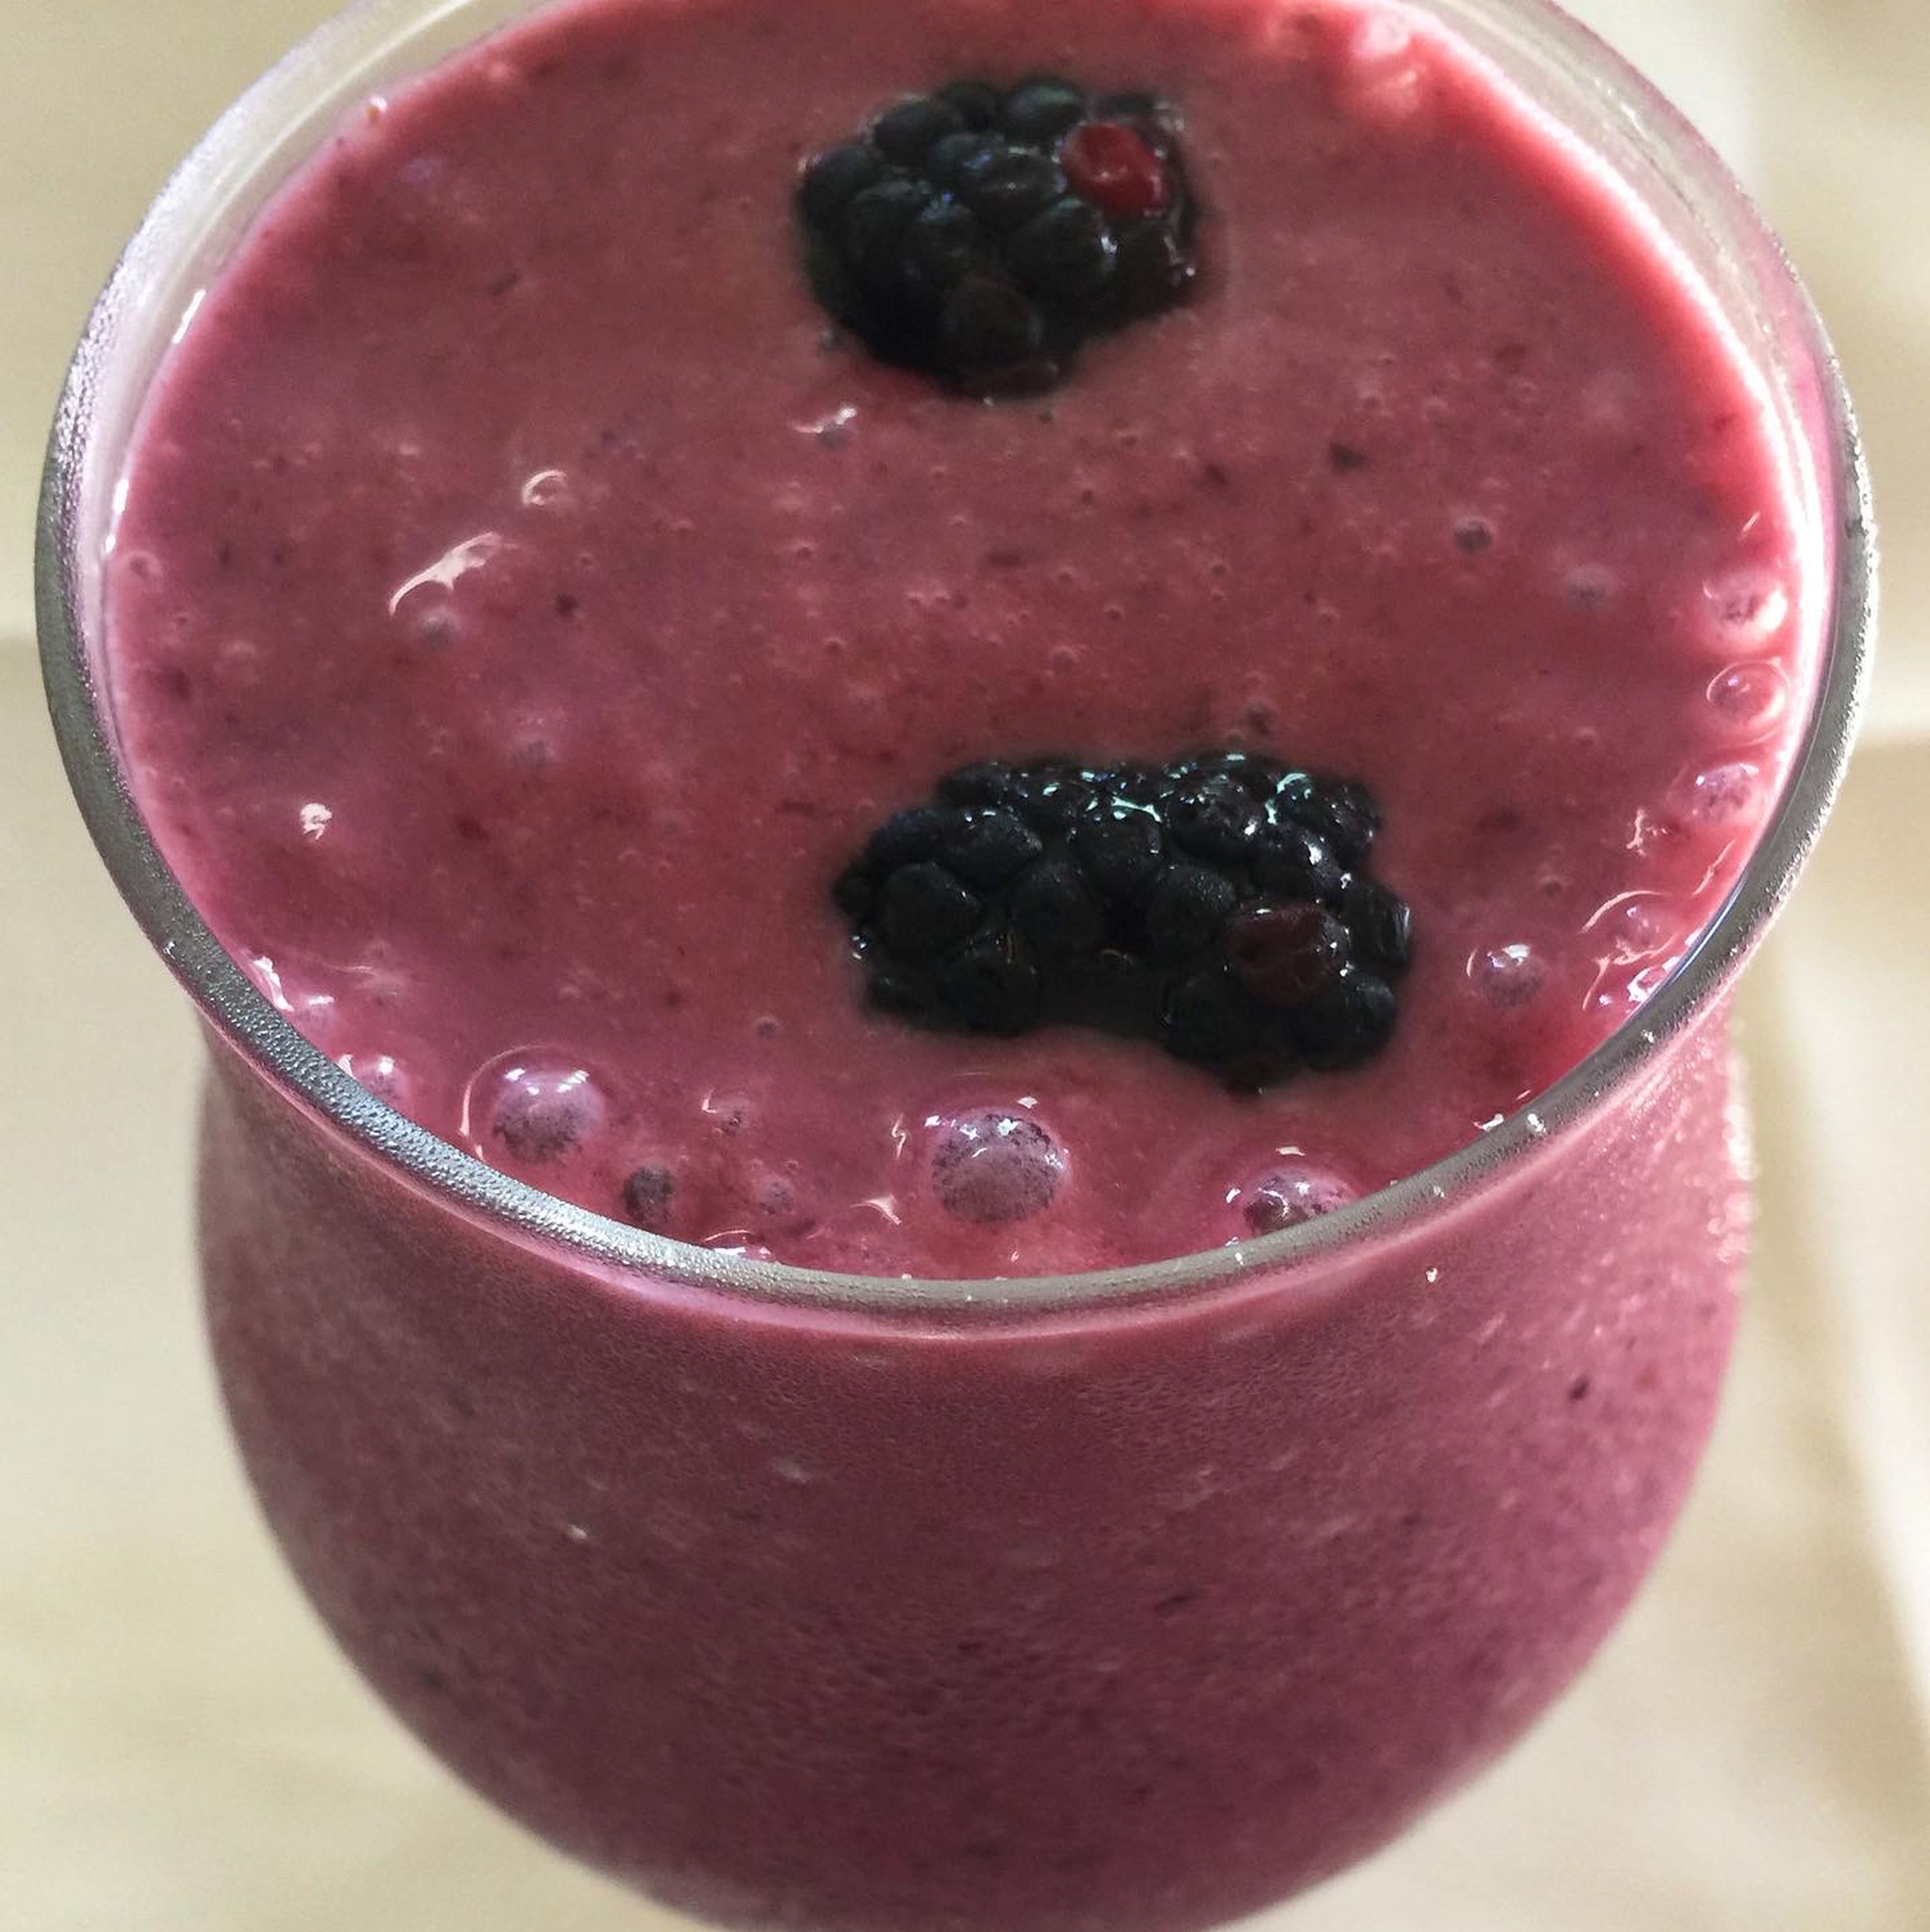 Place all ingredients in a blender, until a smooth consistency is reached.